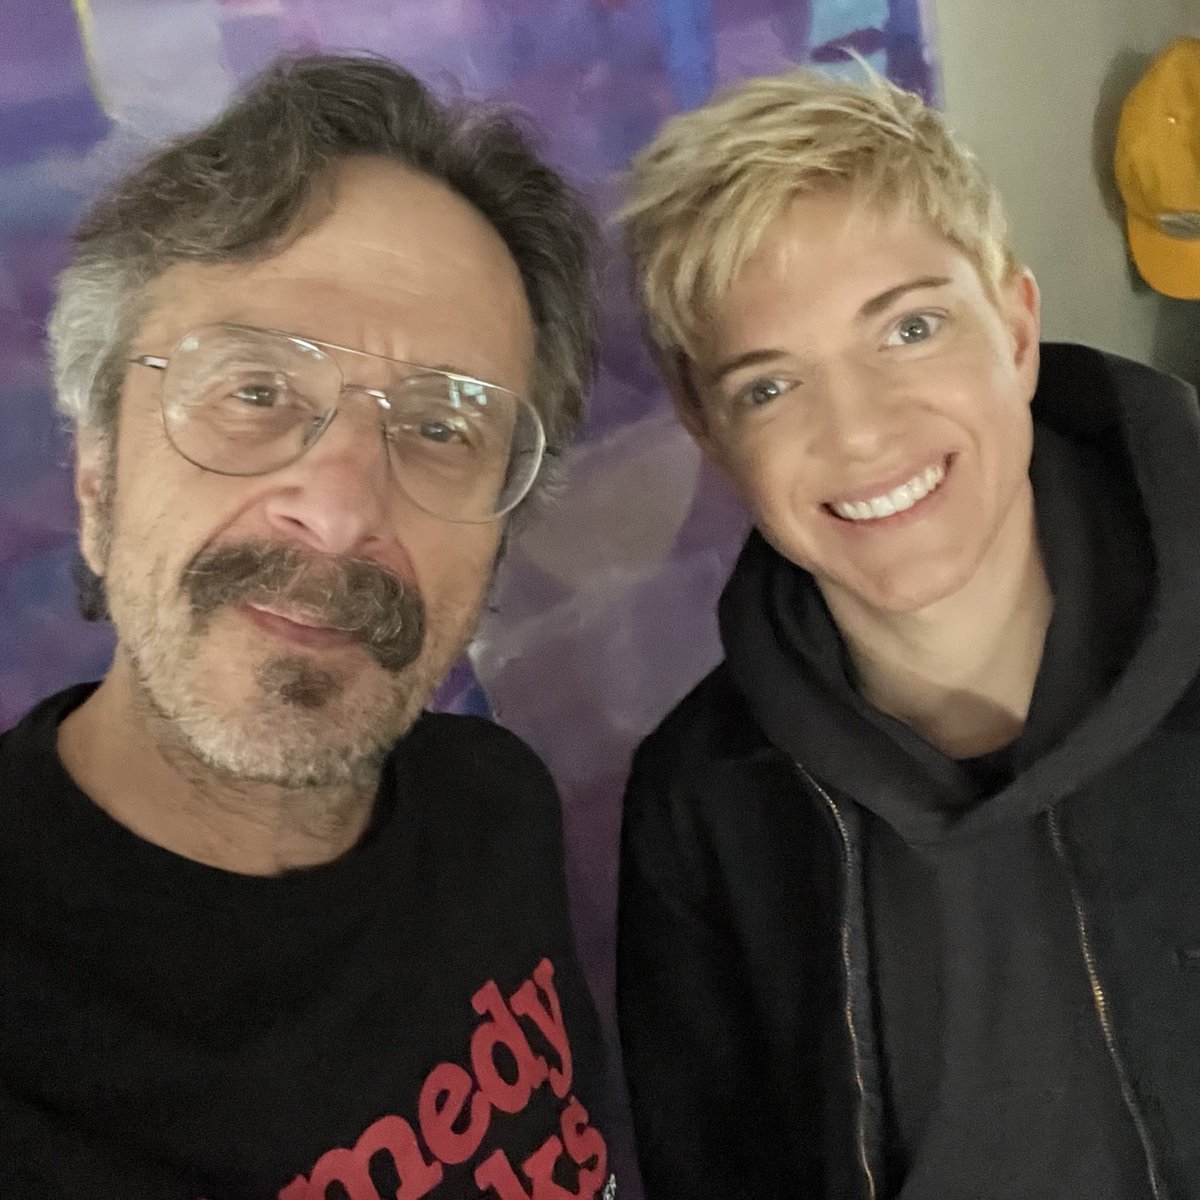 Today is @TheMaeMartin day on wtfpod.com! Canada, Nathan Fielder, addiction and rehab, the long road of identity acceptance! Great talk! Listen up! Episode hosted by @acast - wtfpod.com/podcast/episod… On @ApplePodcasts - podcasts.apple.com/us/podcast/epi…